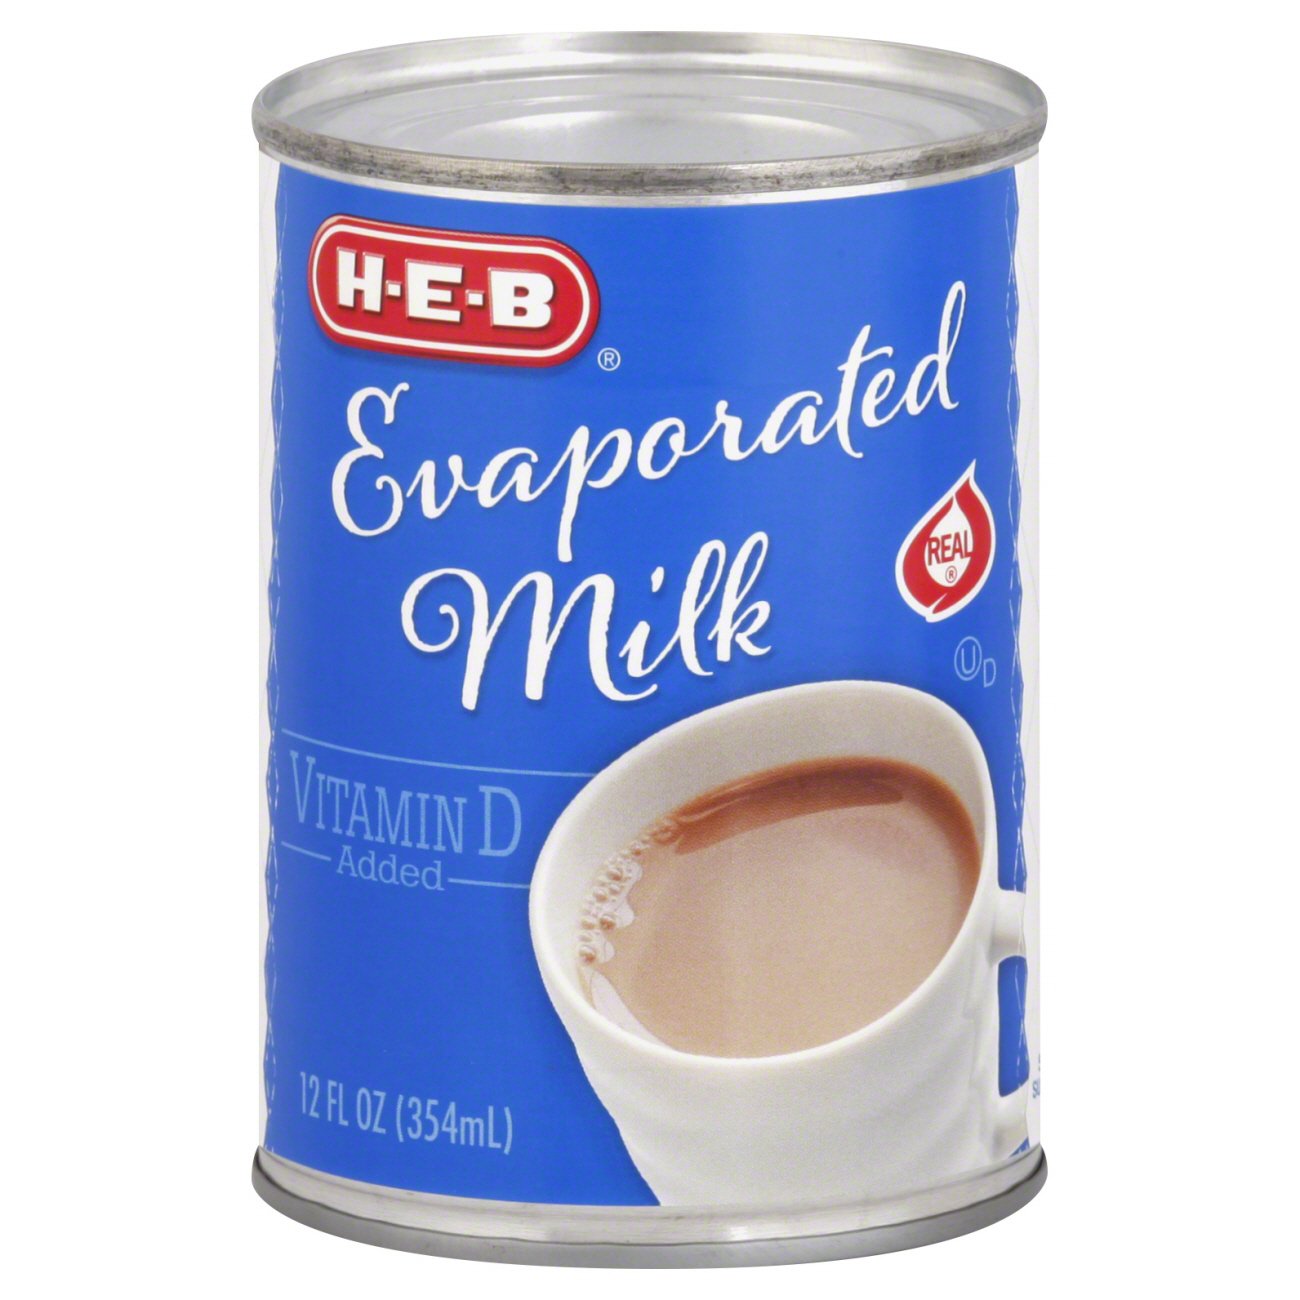 can a puppy drink evaporated milk